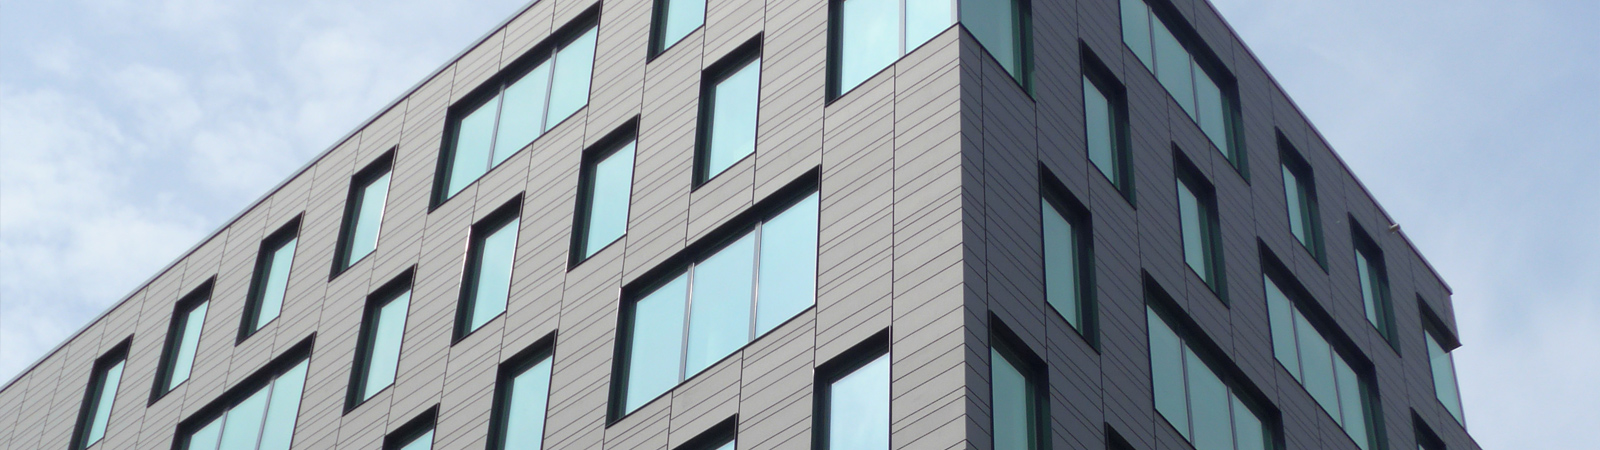 Architecture with powdercoated windows